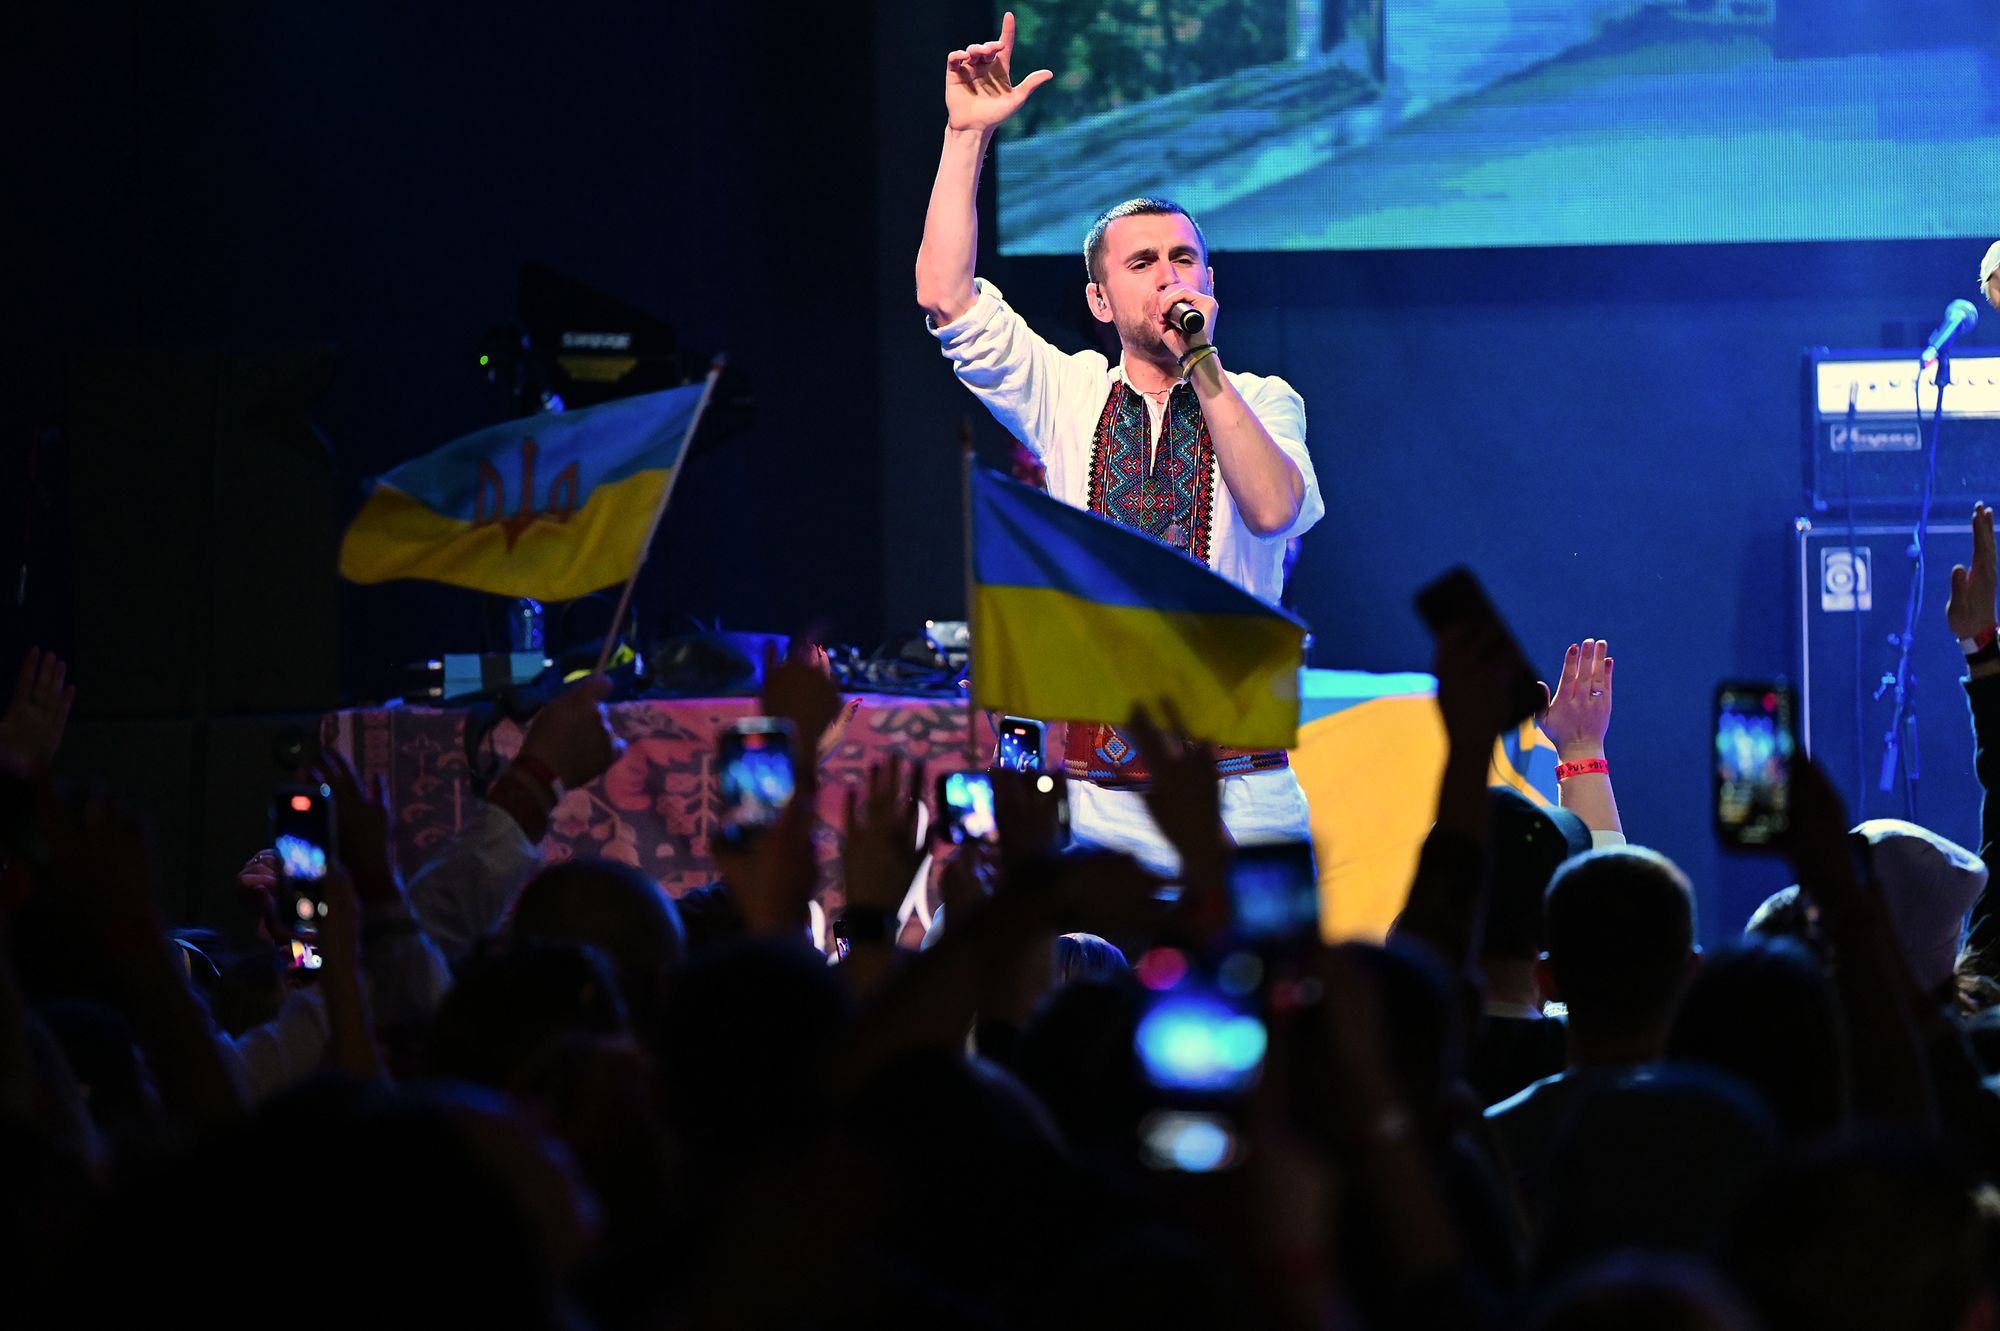 From Eurovision to international advocacy: Kalush Orchestra's journey to promote Ukrainian culture